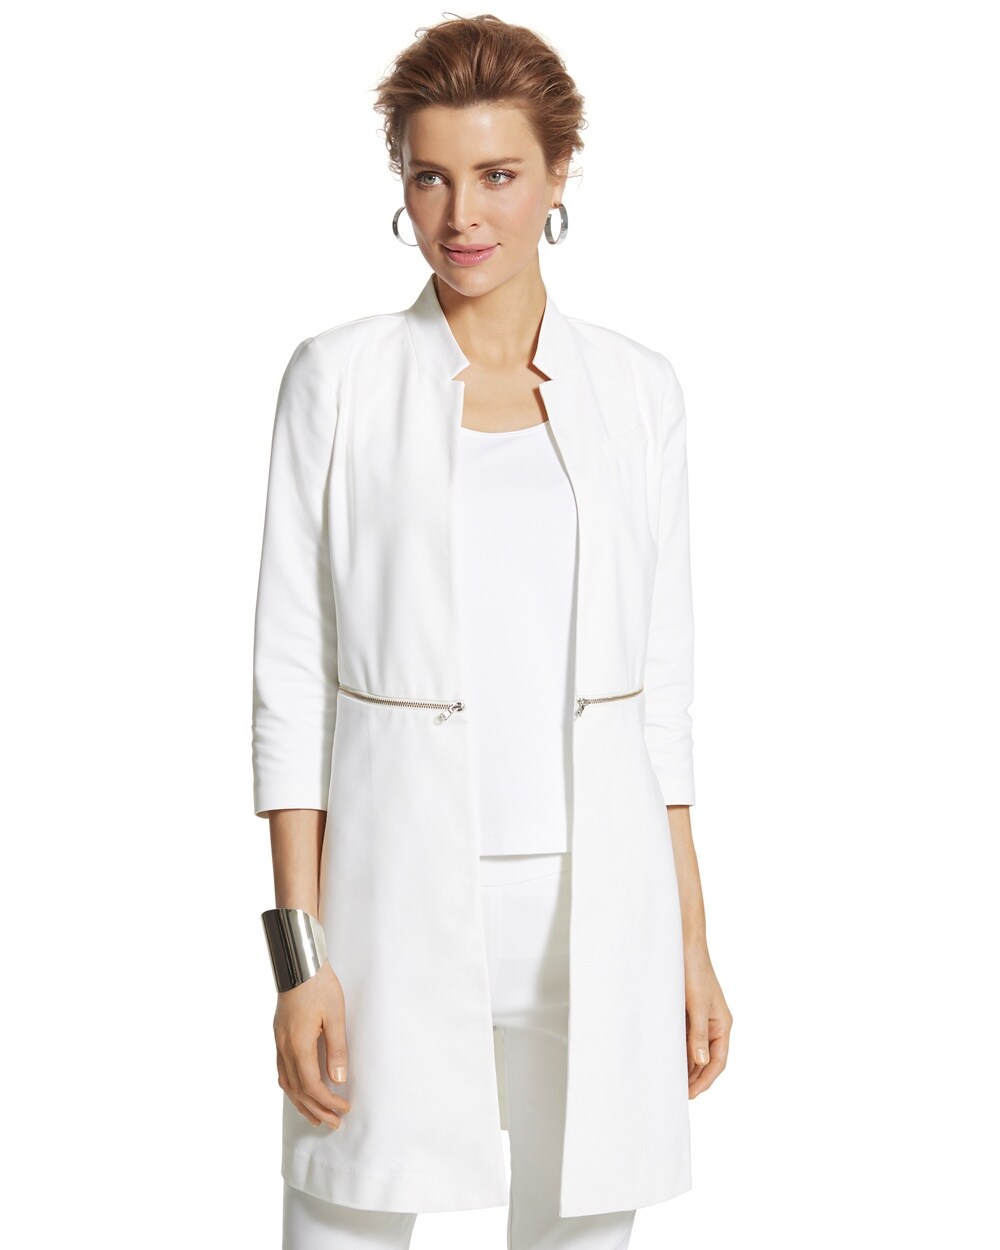 City Chic Topper Jacket